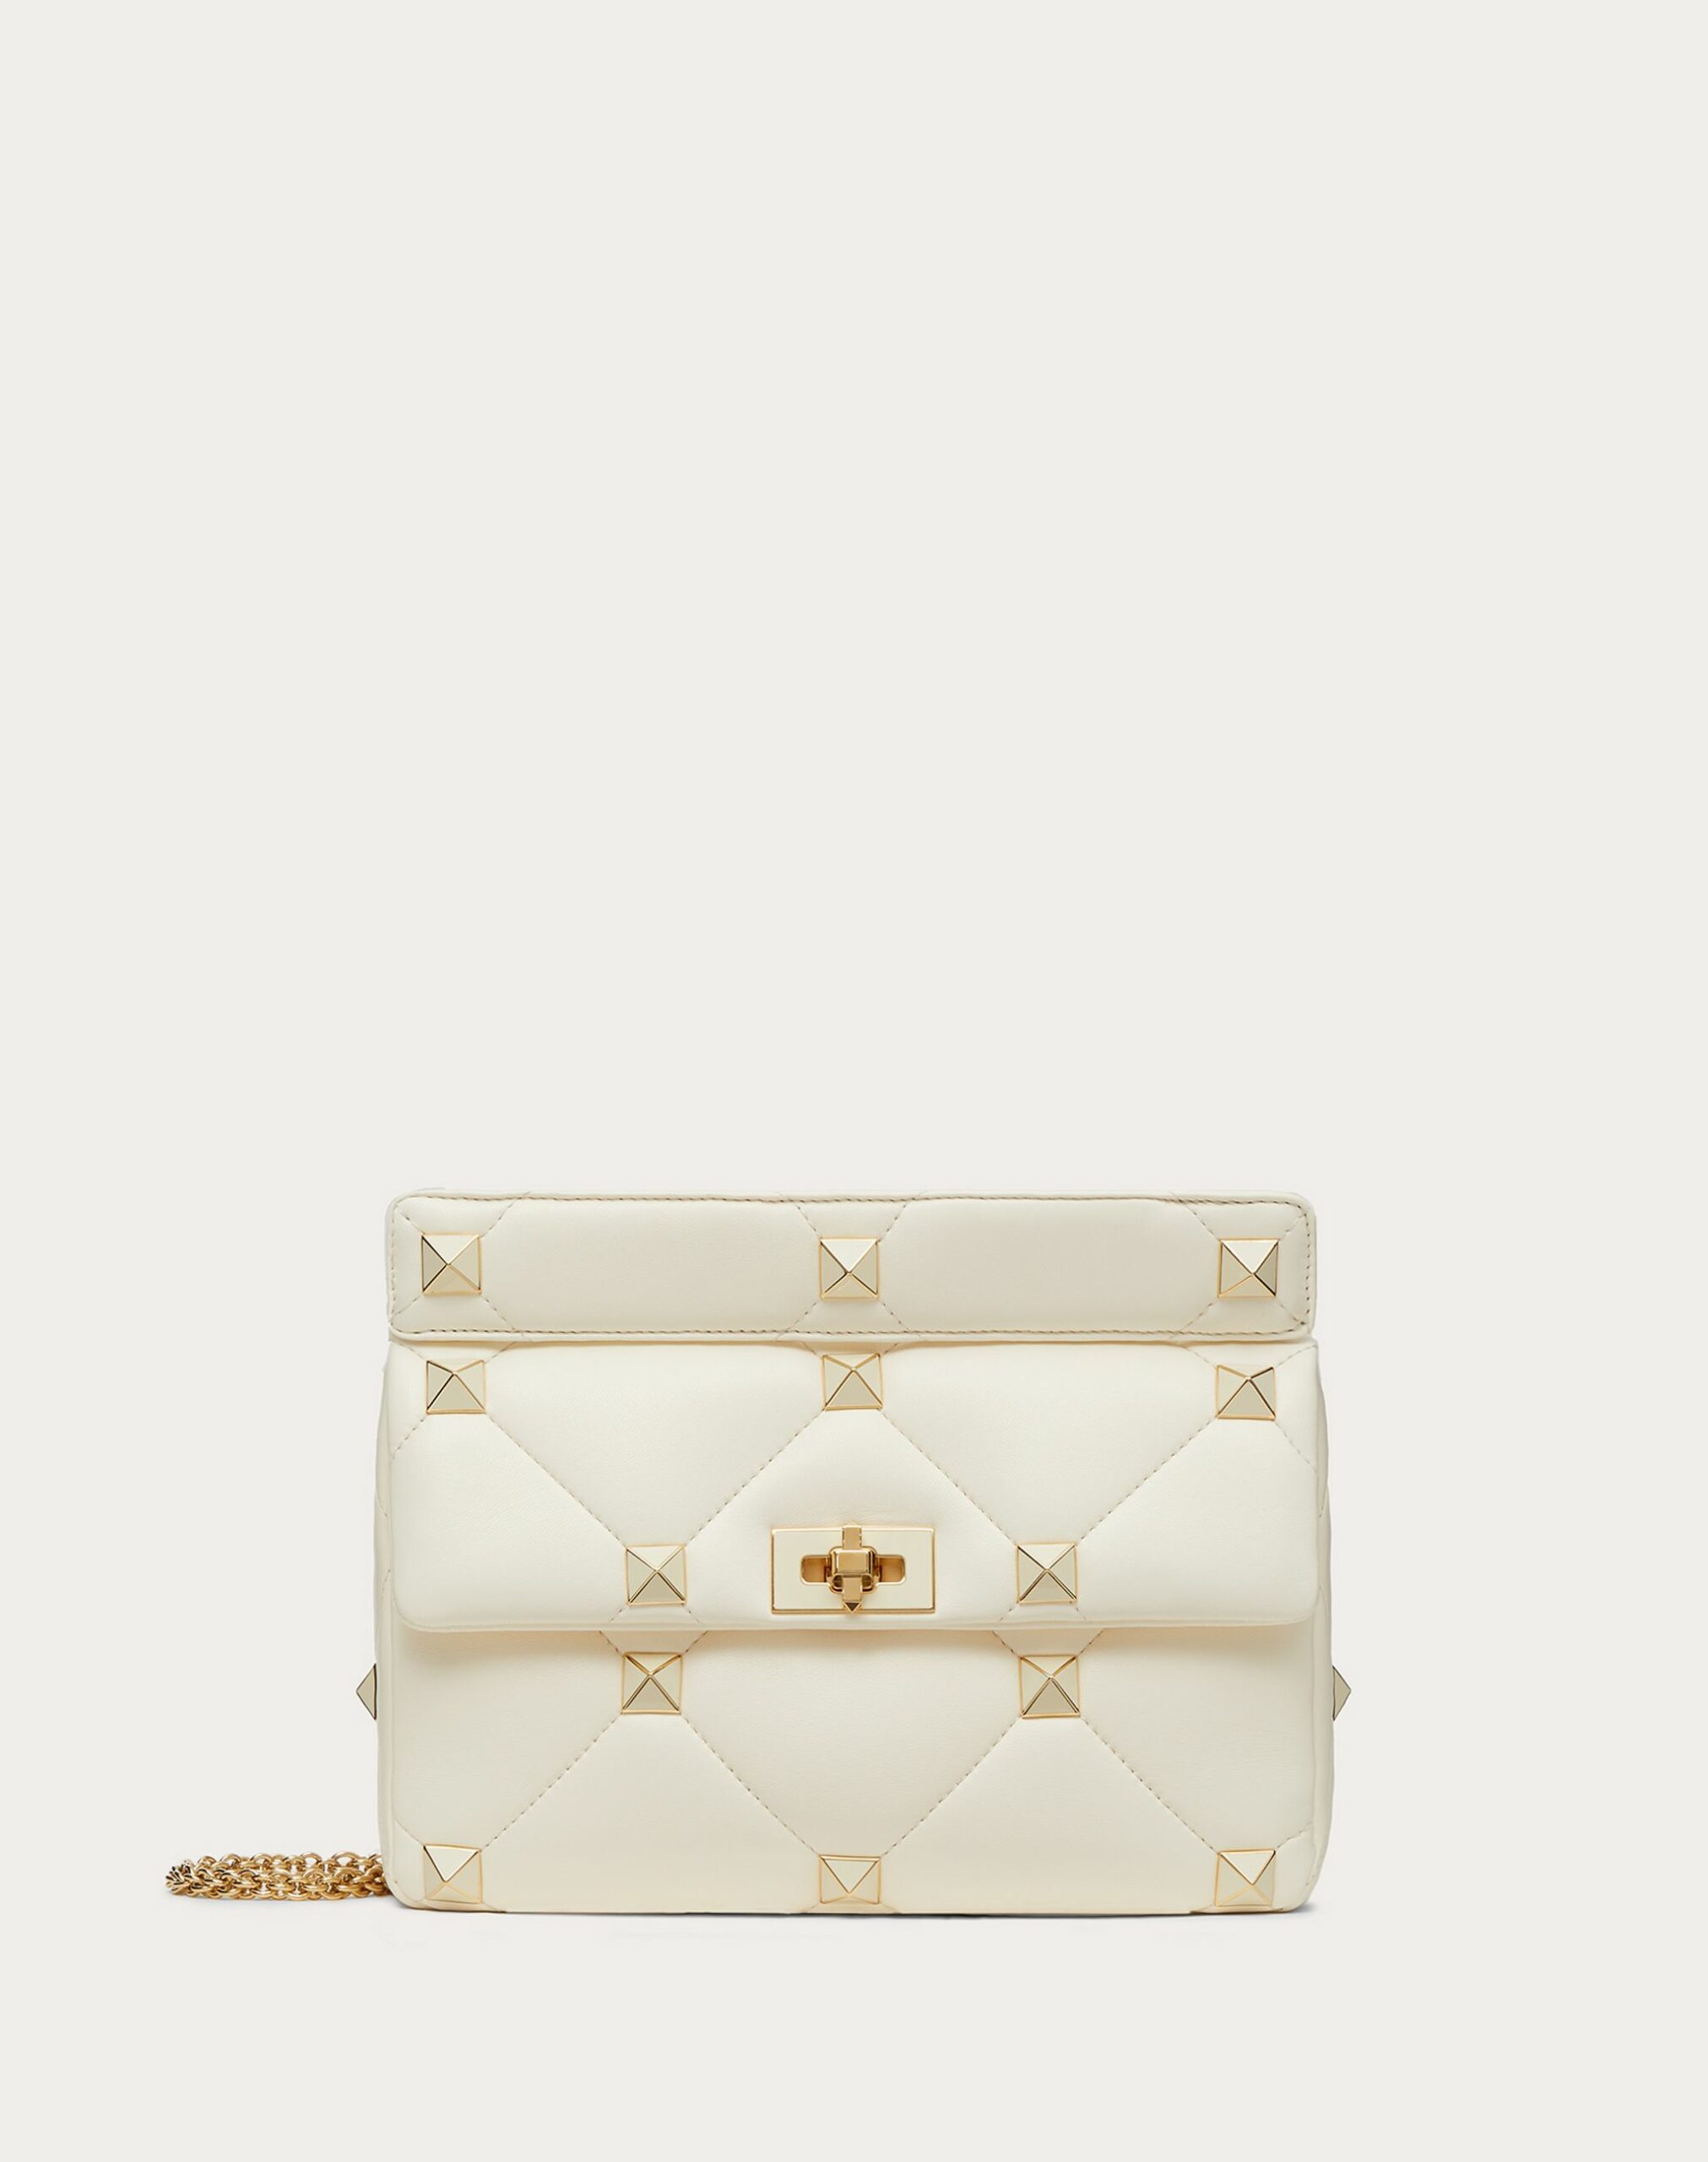 Valentino Large Roman Stud The Shoulder Bag In Nappa With Chain And Enamelled Studs Ivory (XW2B0I60PTH098)